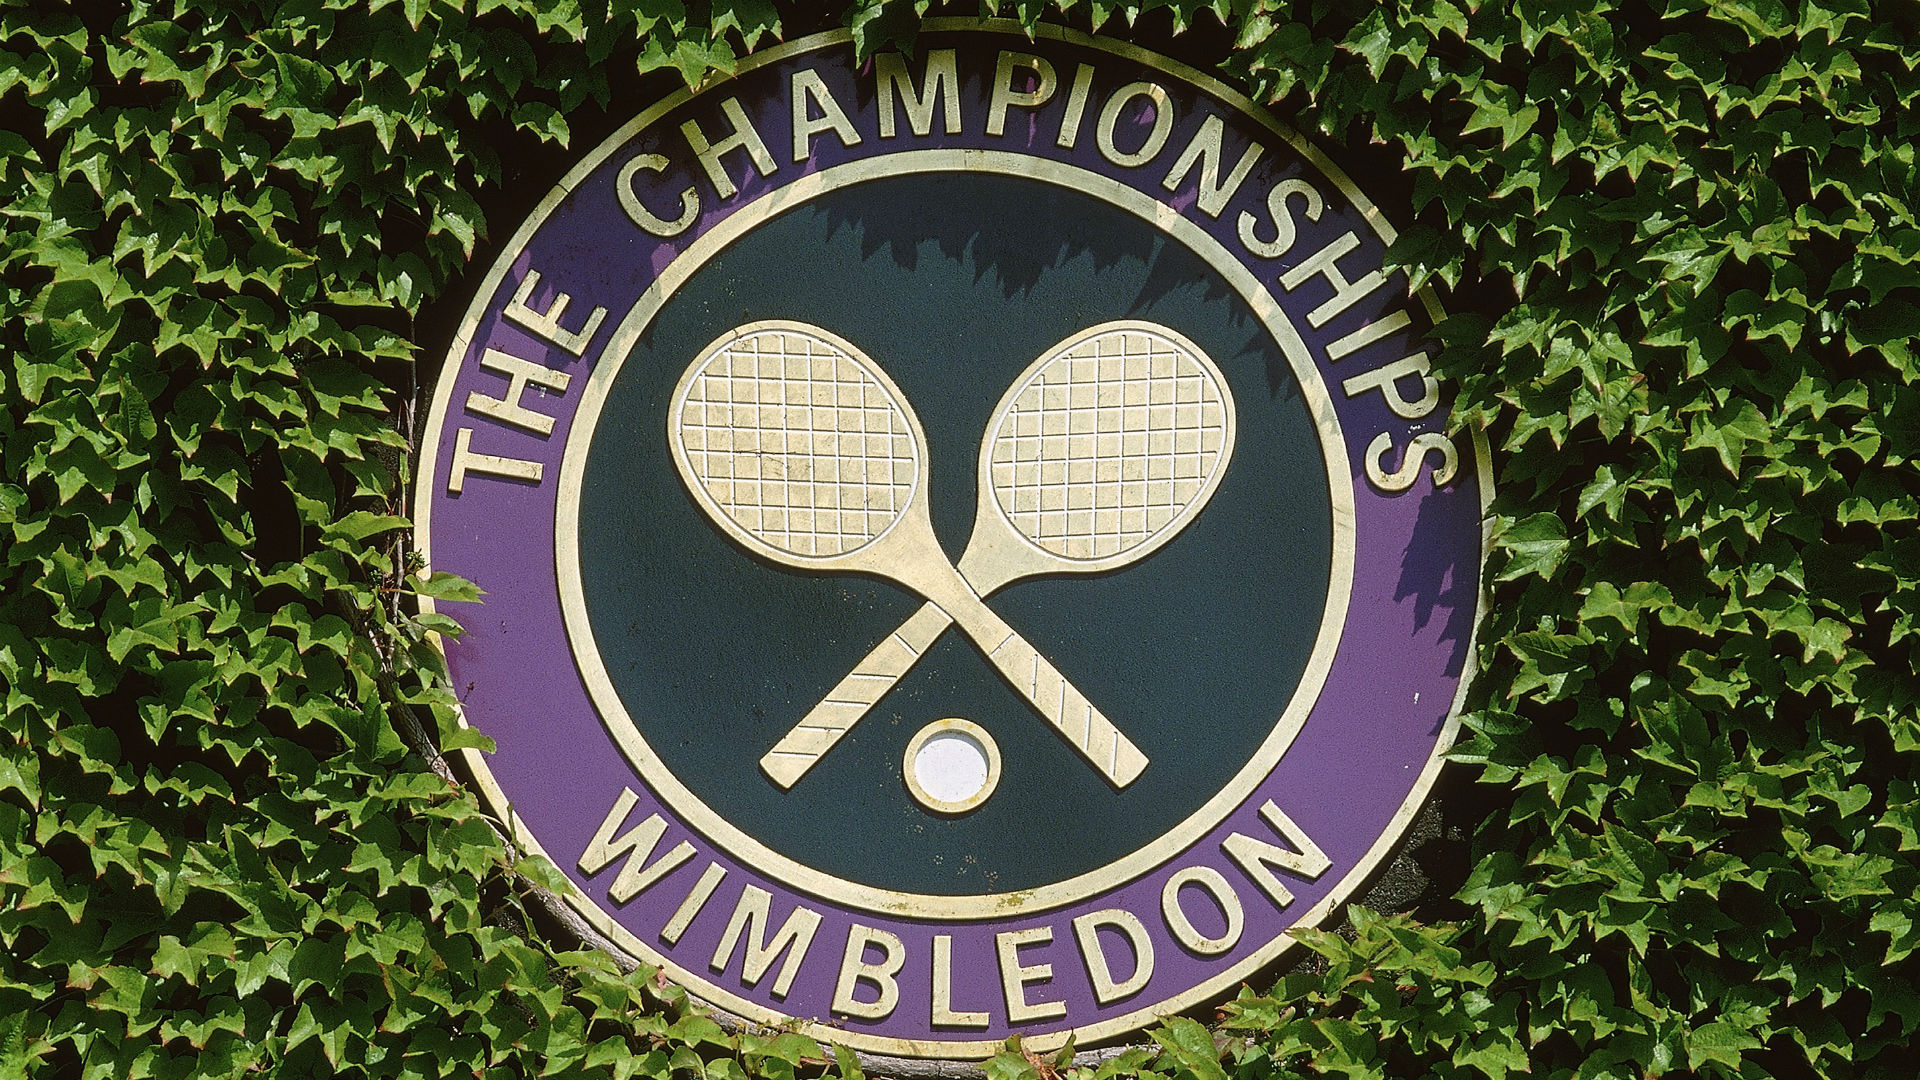 Wimbledon 2019 schedule: TV channels, dates, times for every match at